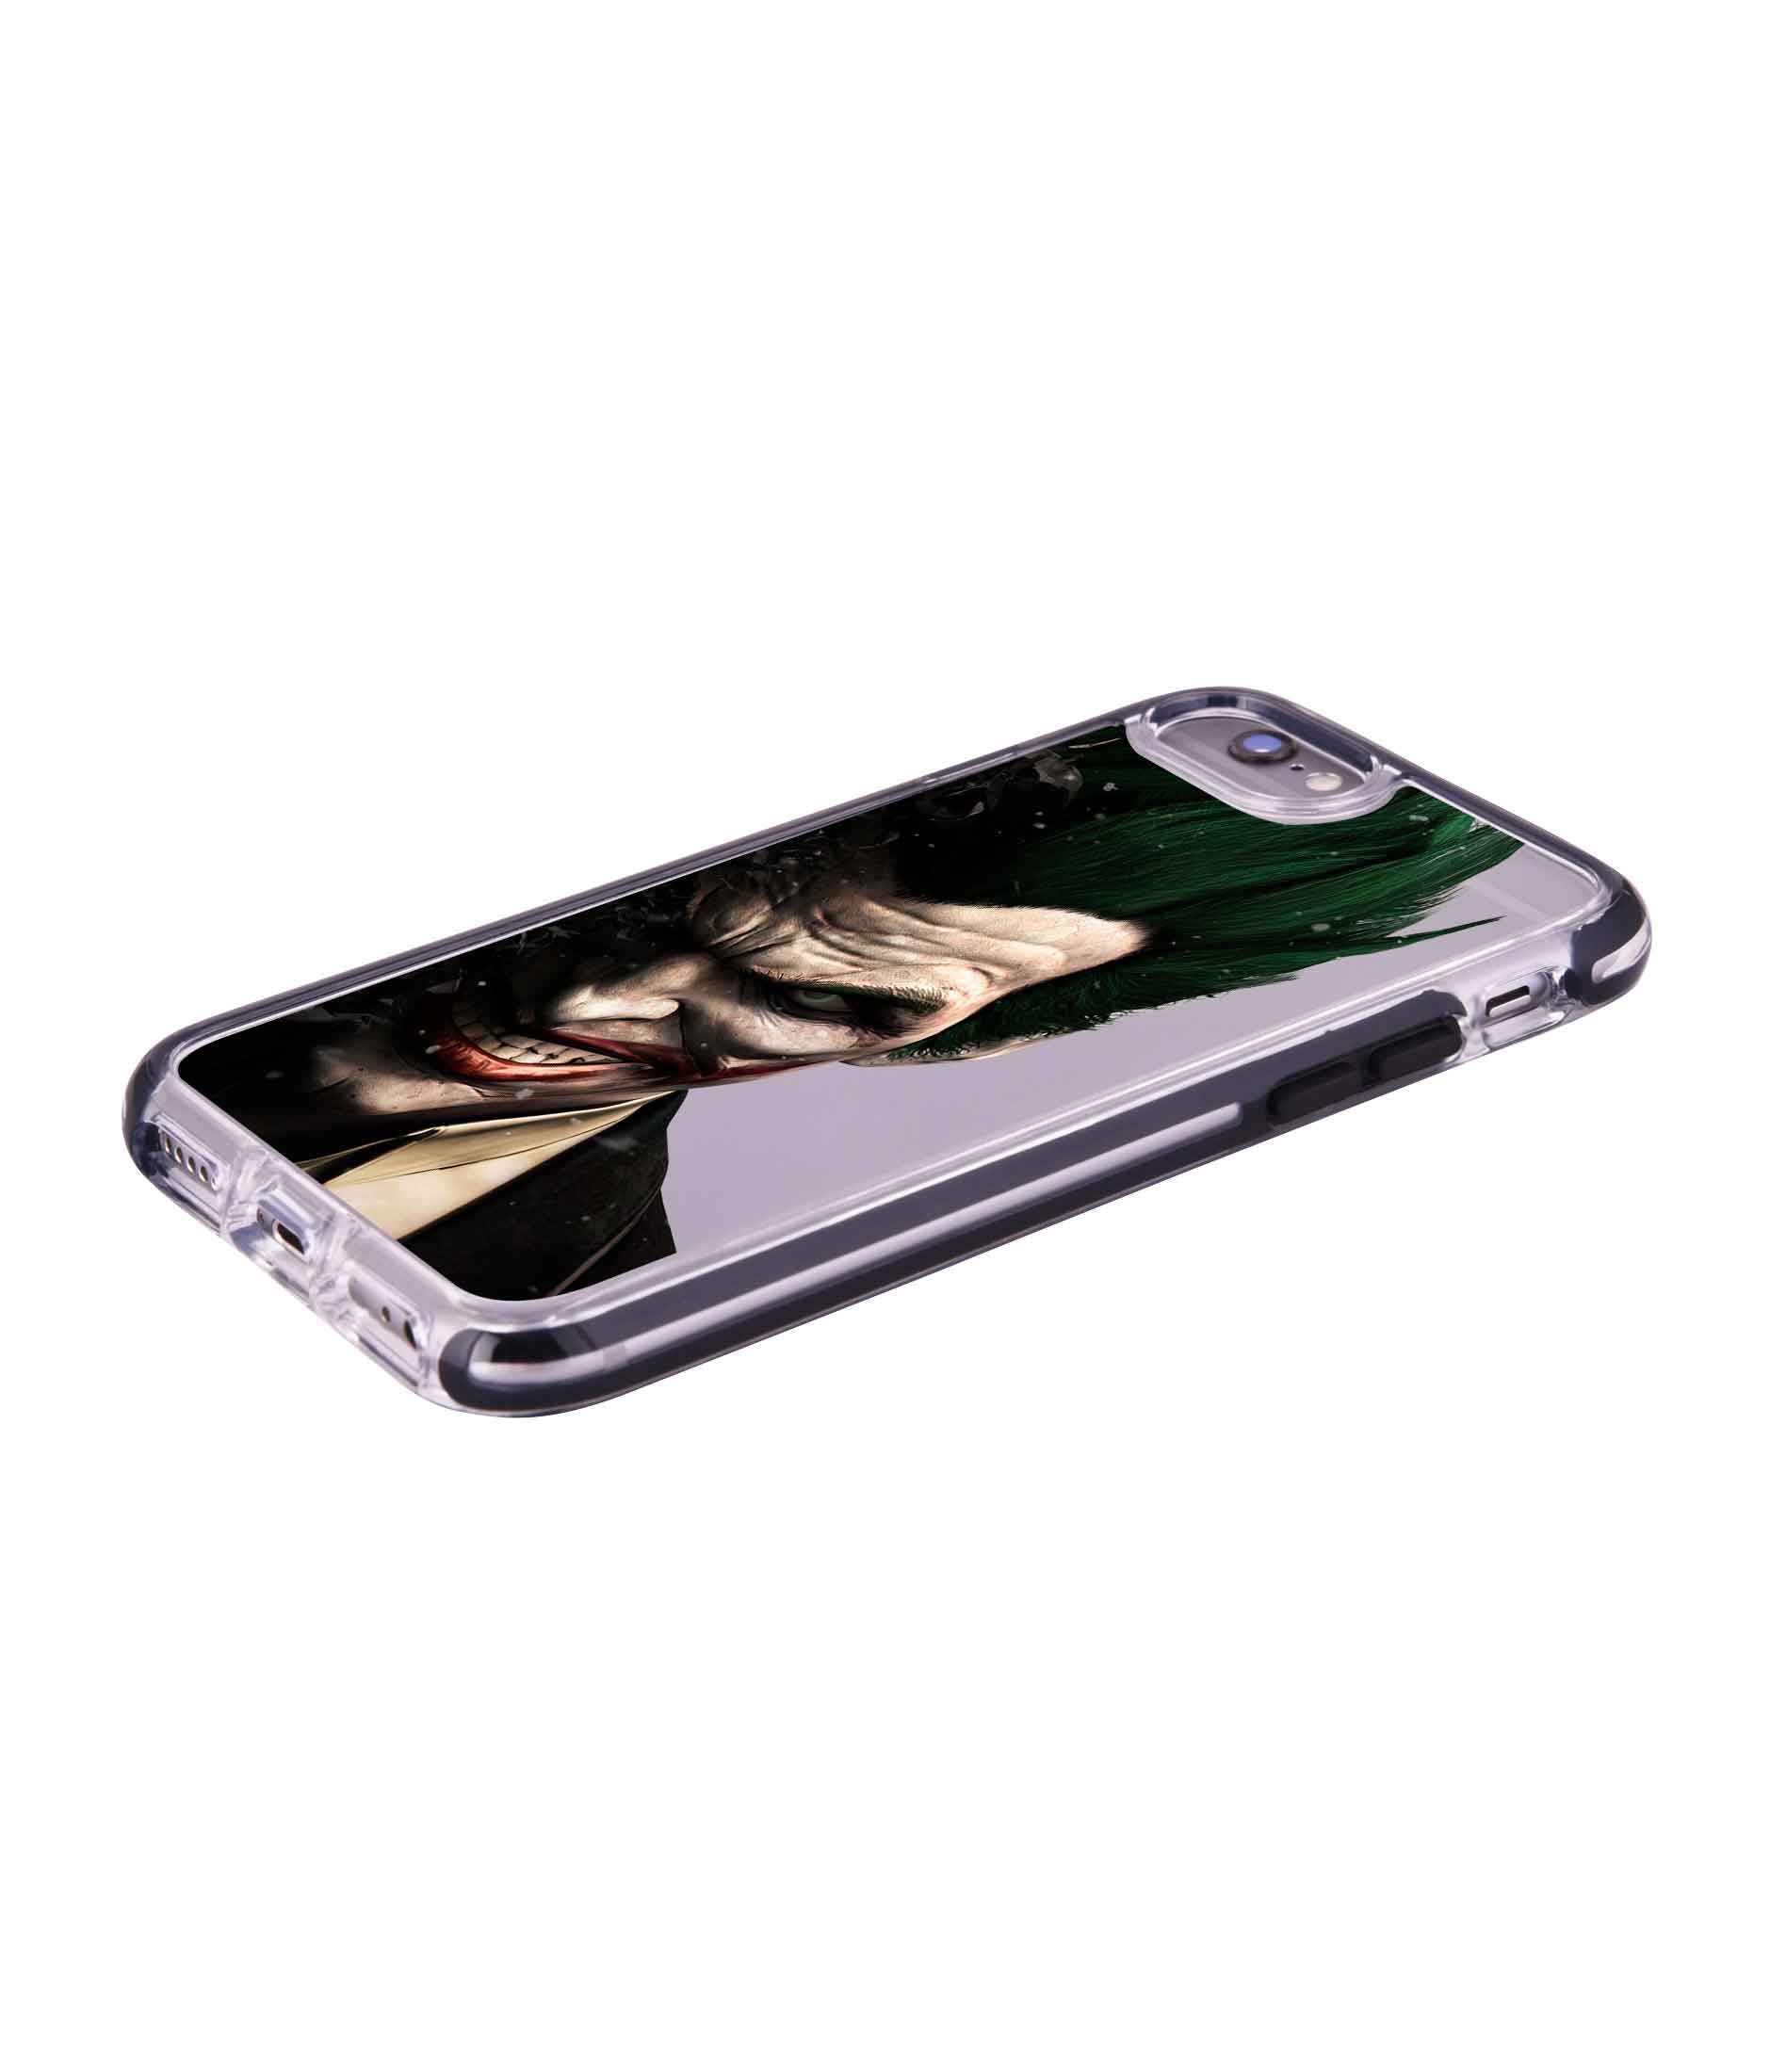 Joker Withers - Extreme Phone Case for iPhone 6